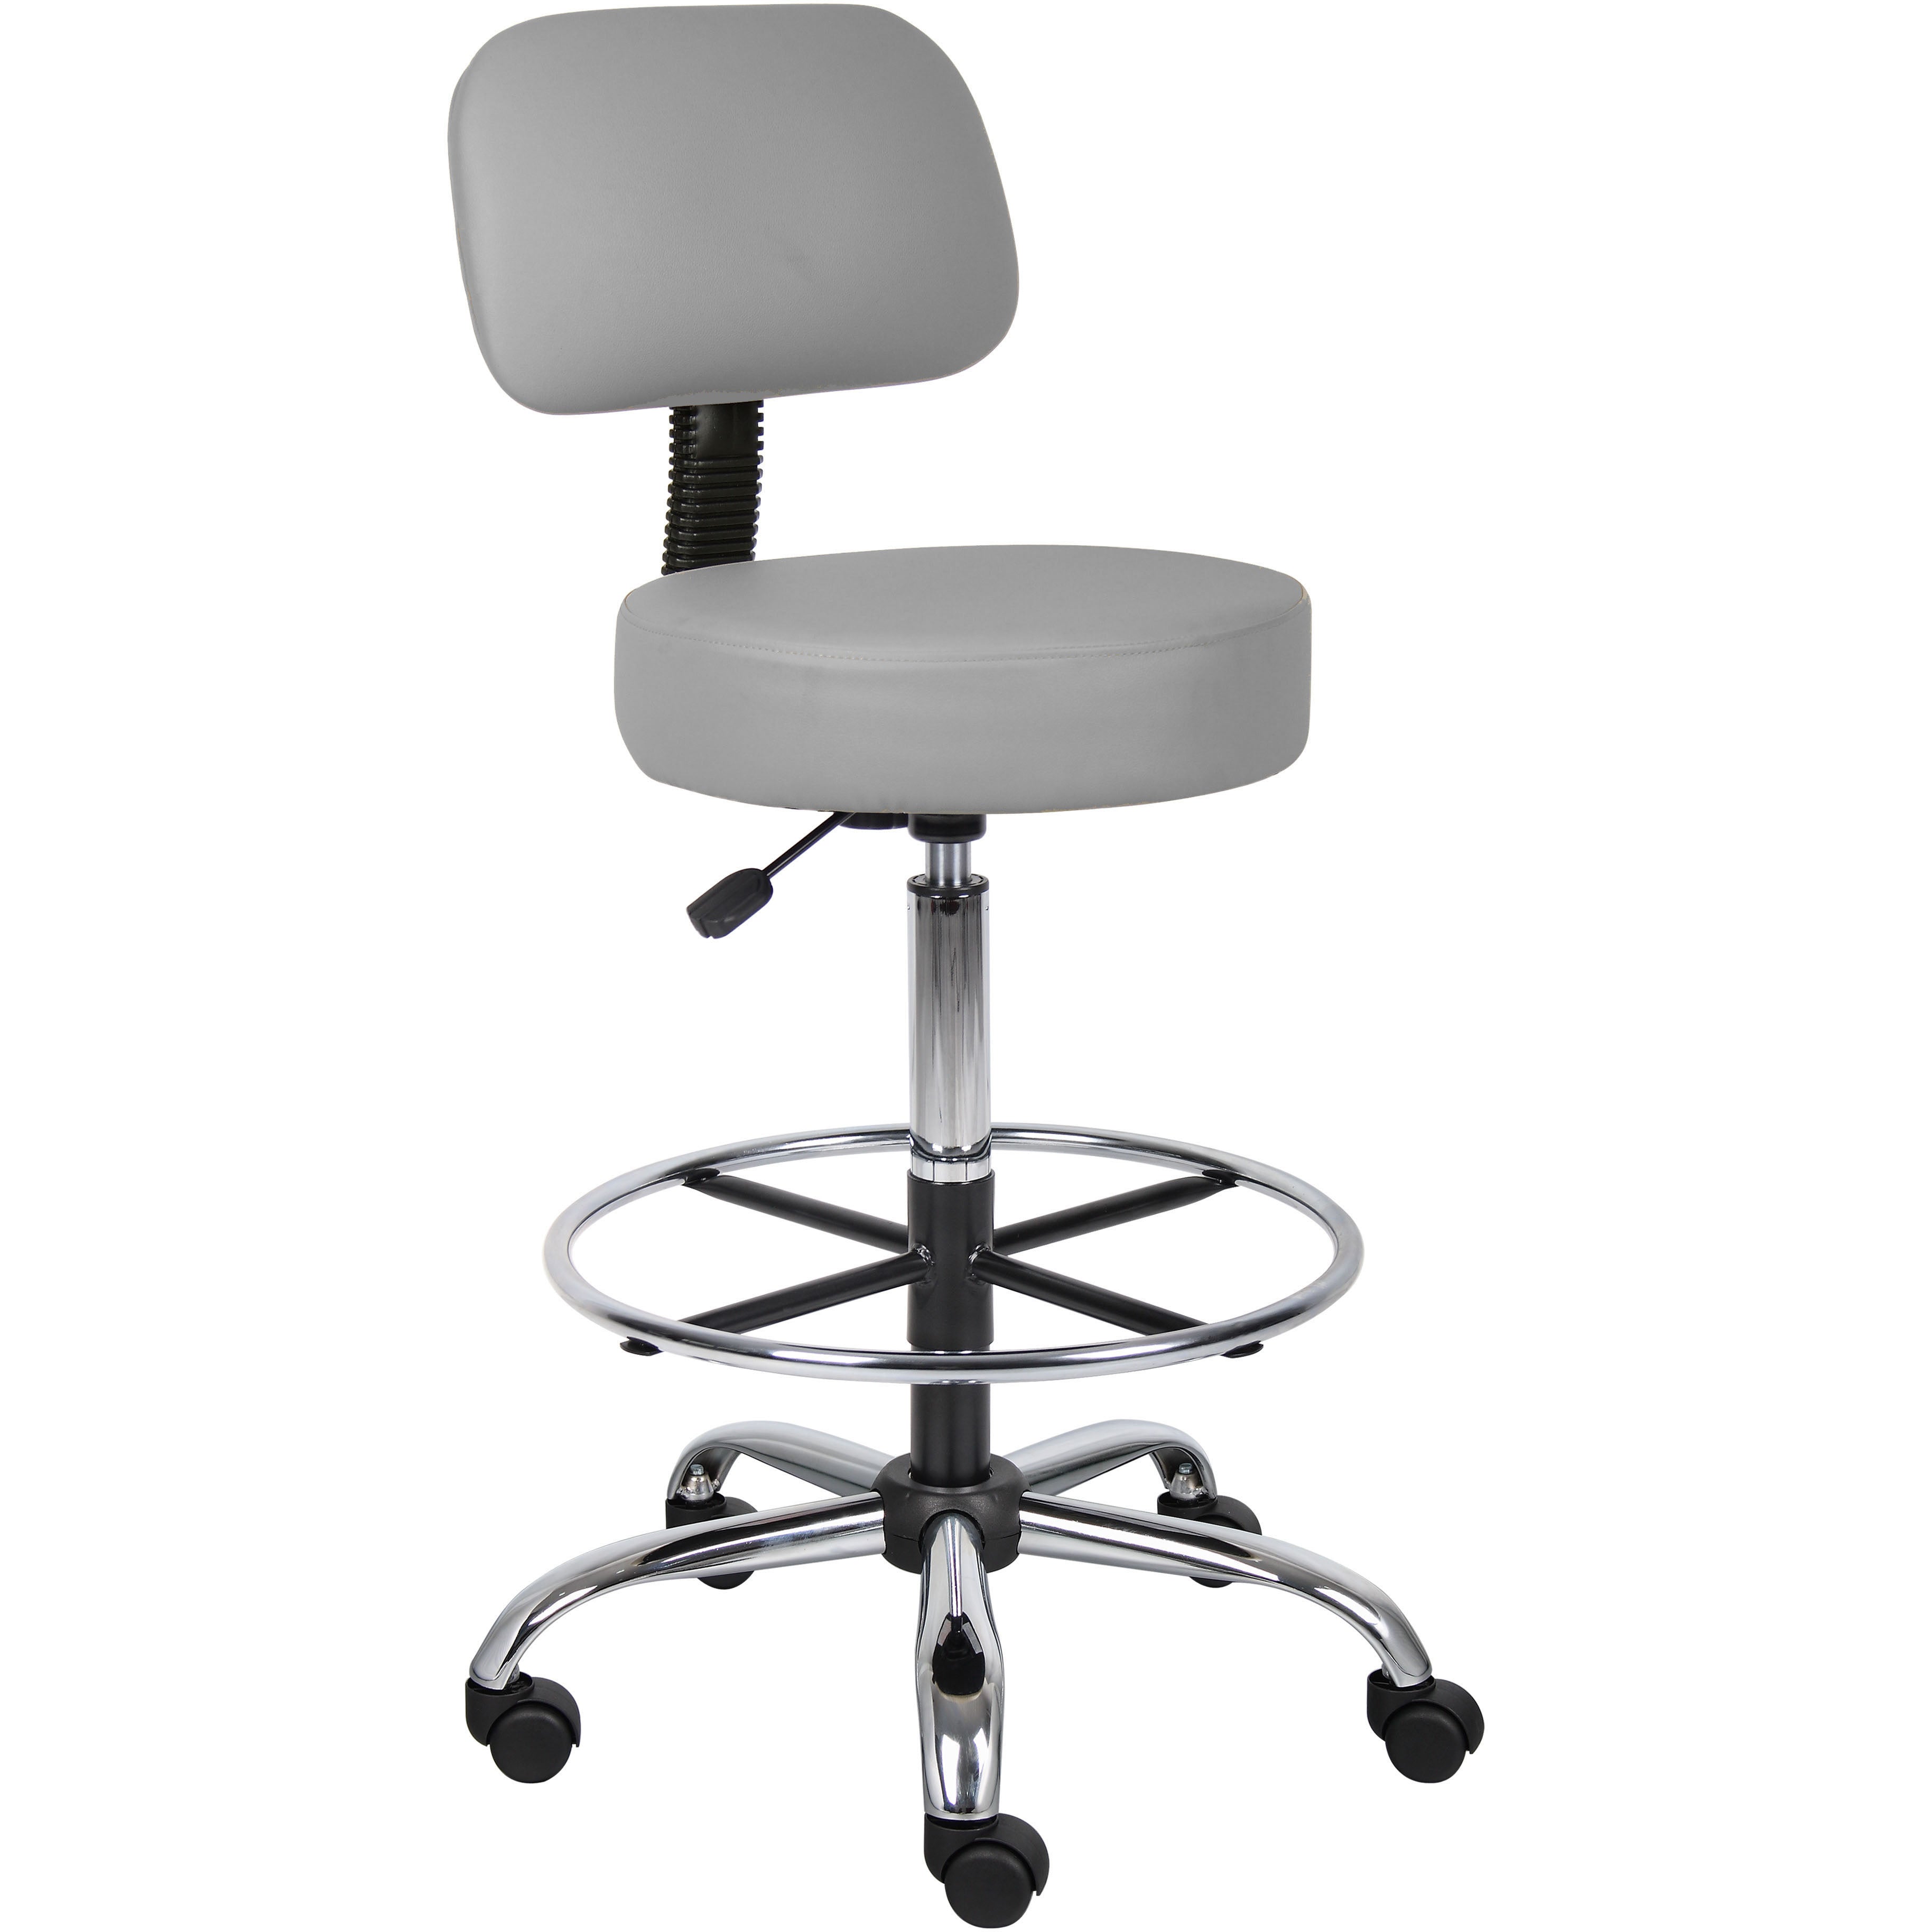 Antimicrobial Vinyl Medical/Drafting Stool with Back Cushion, B16245-GY